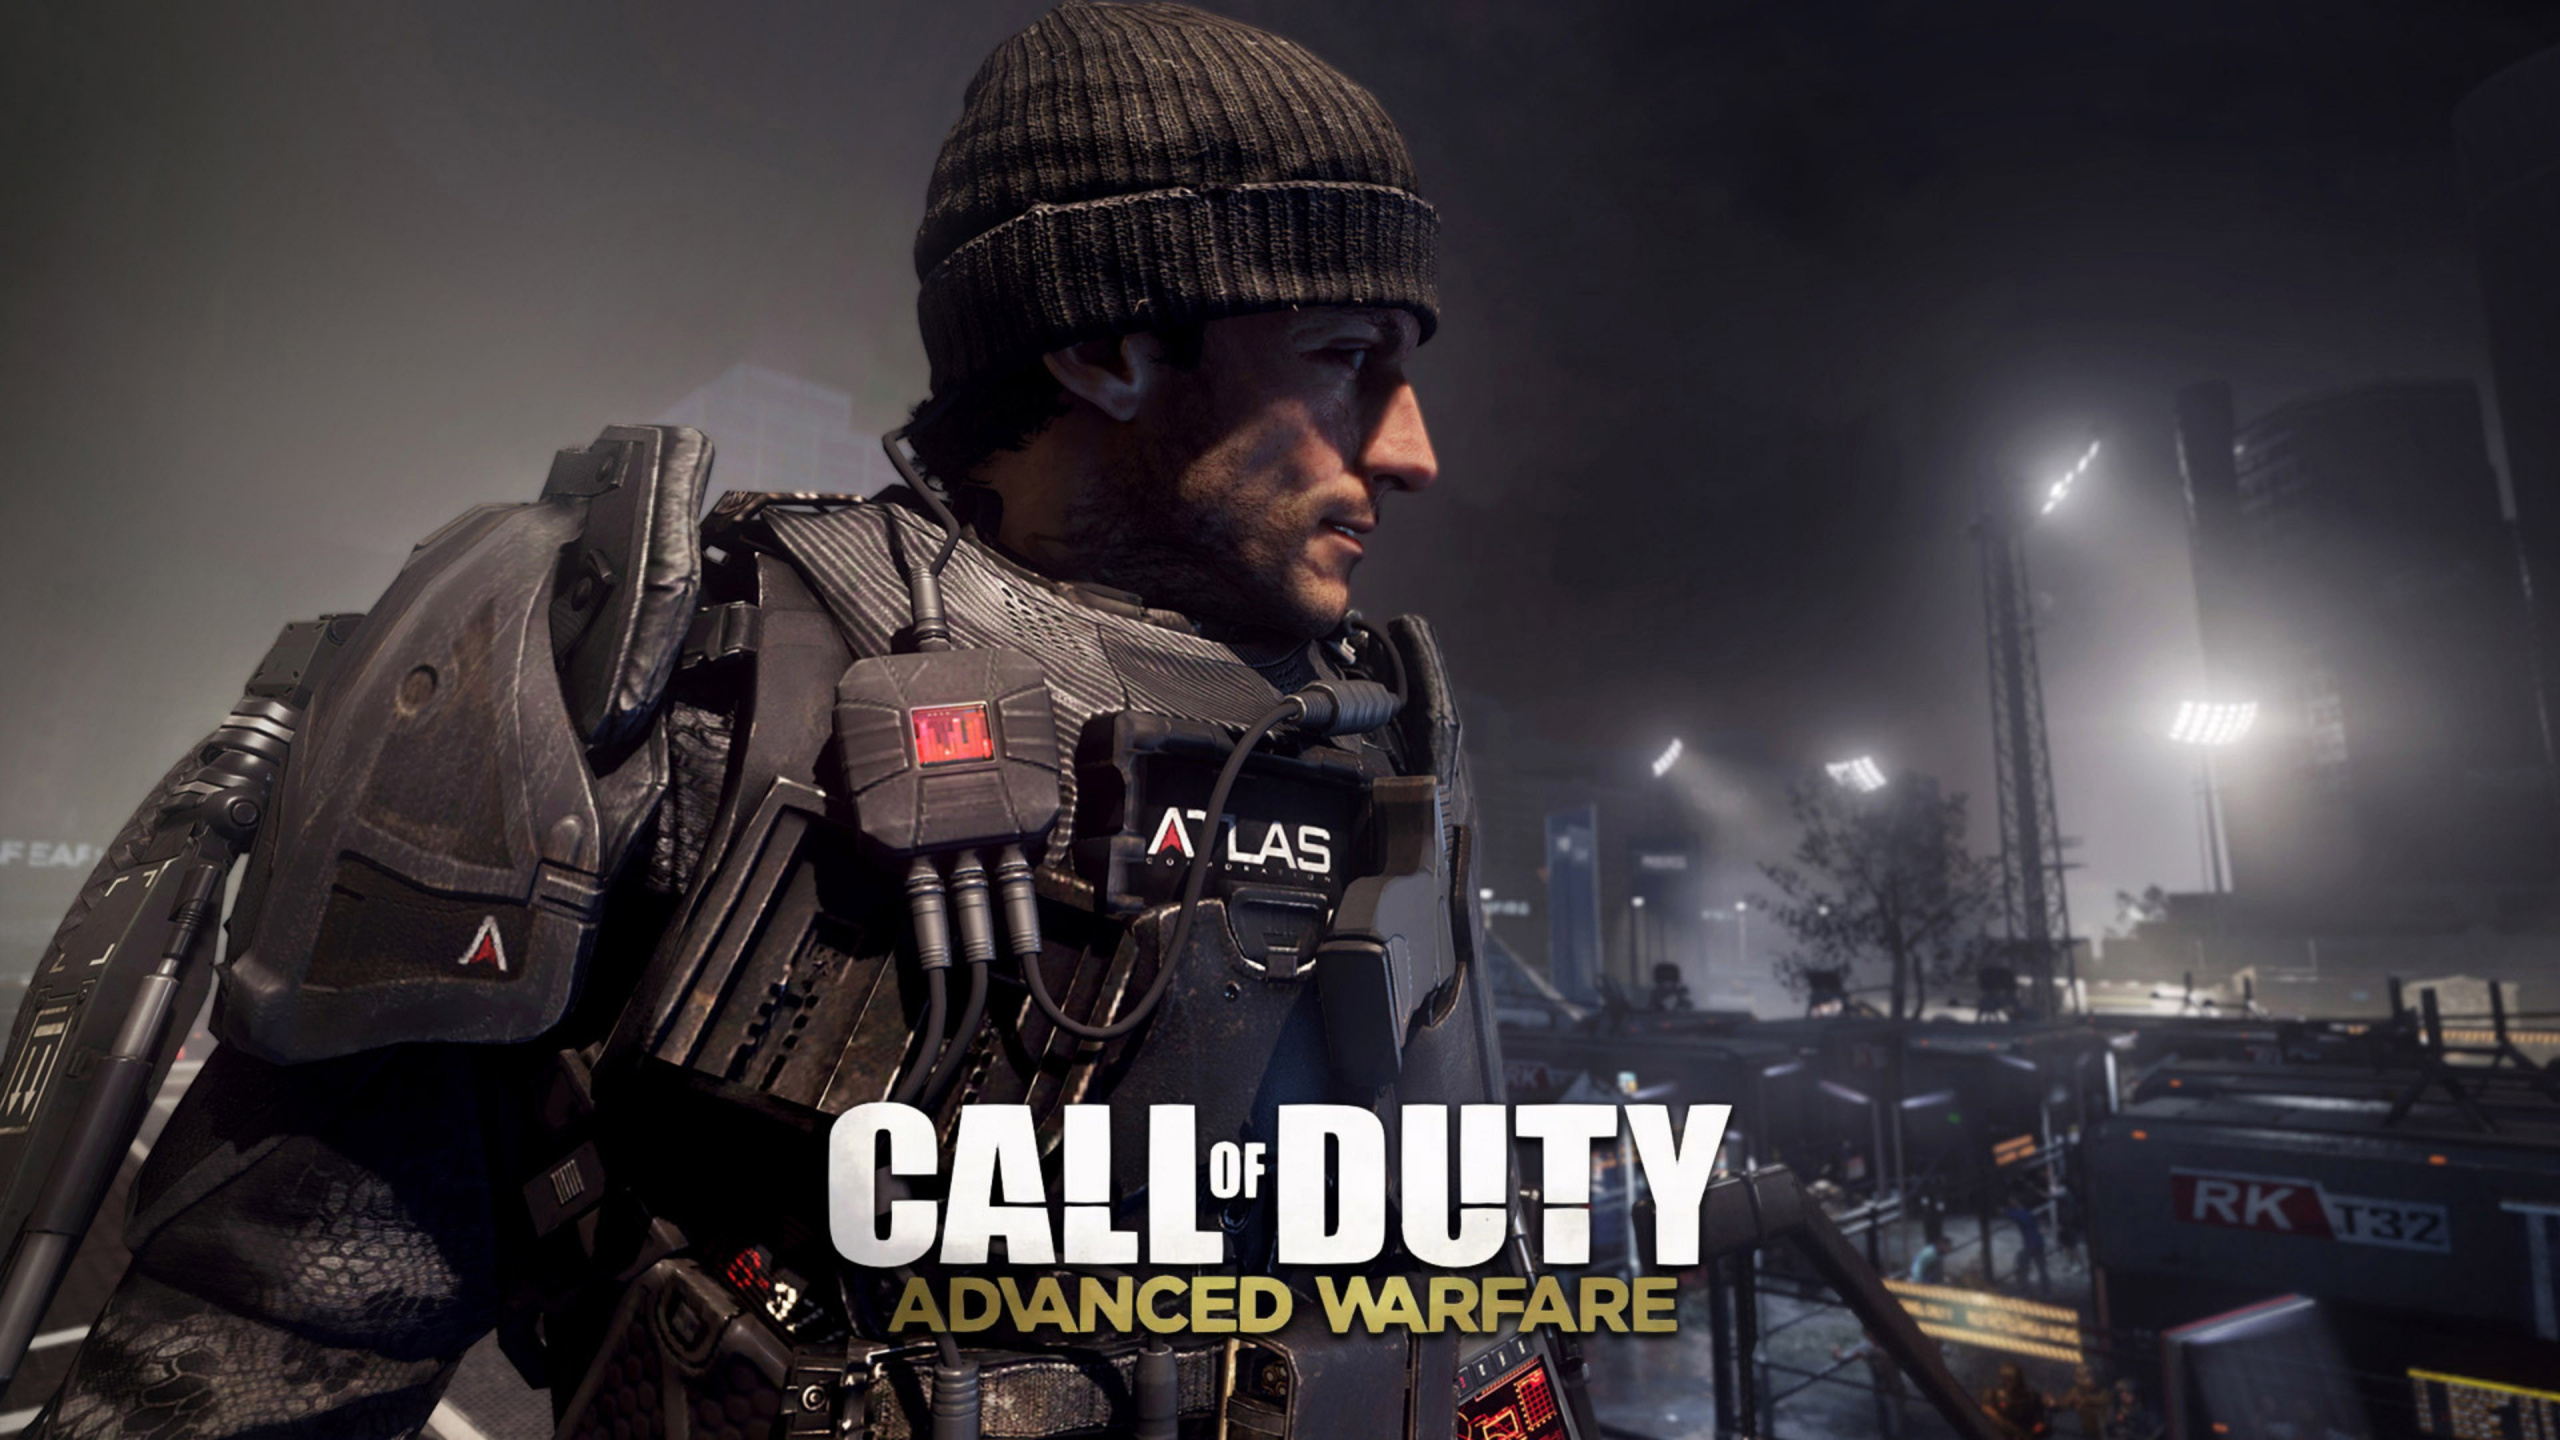 Call of Duty Advanced Warfare, Sledgehammer Games, Multiplayer Video Game, pc Game, Soldier. Wallpaper in 2560x1440 Resolution